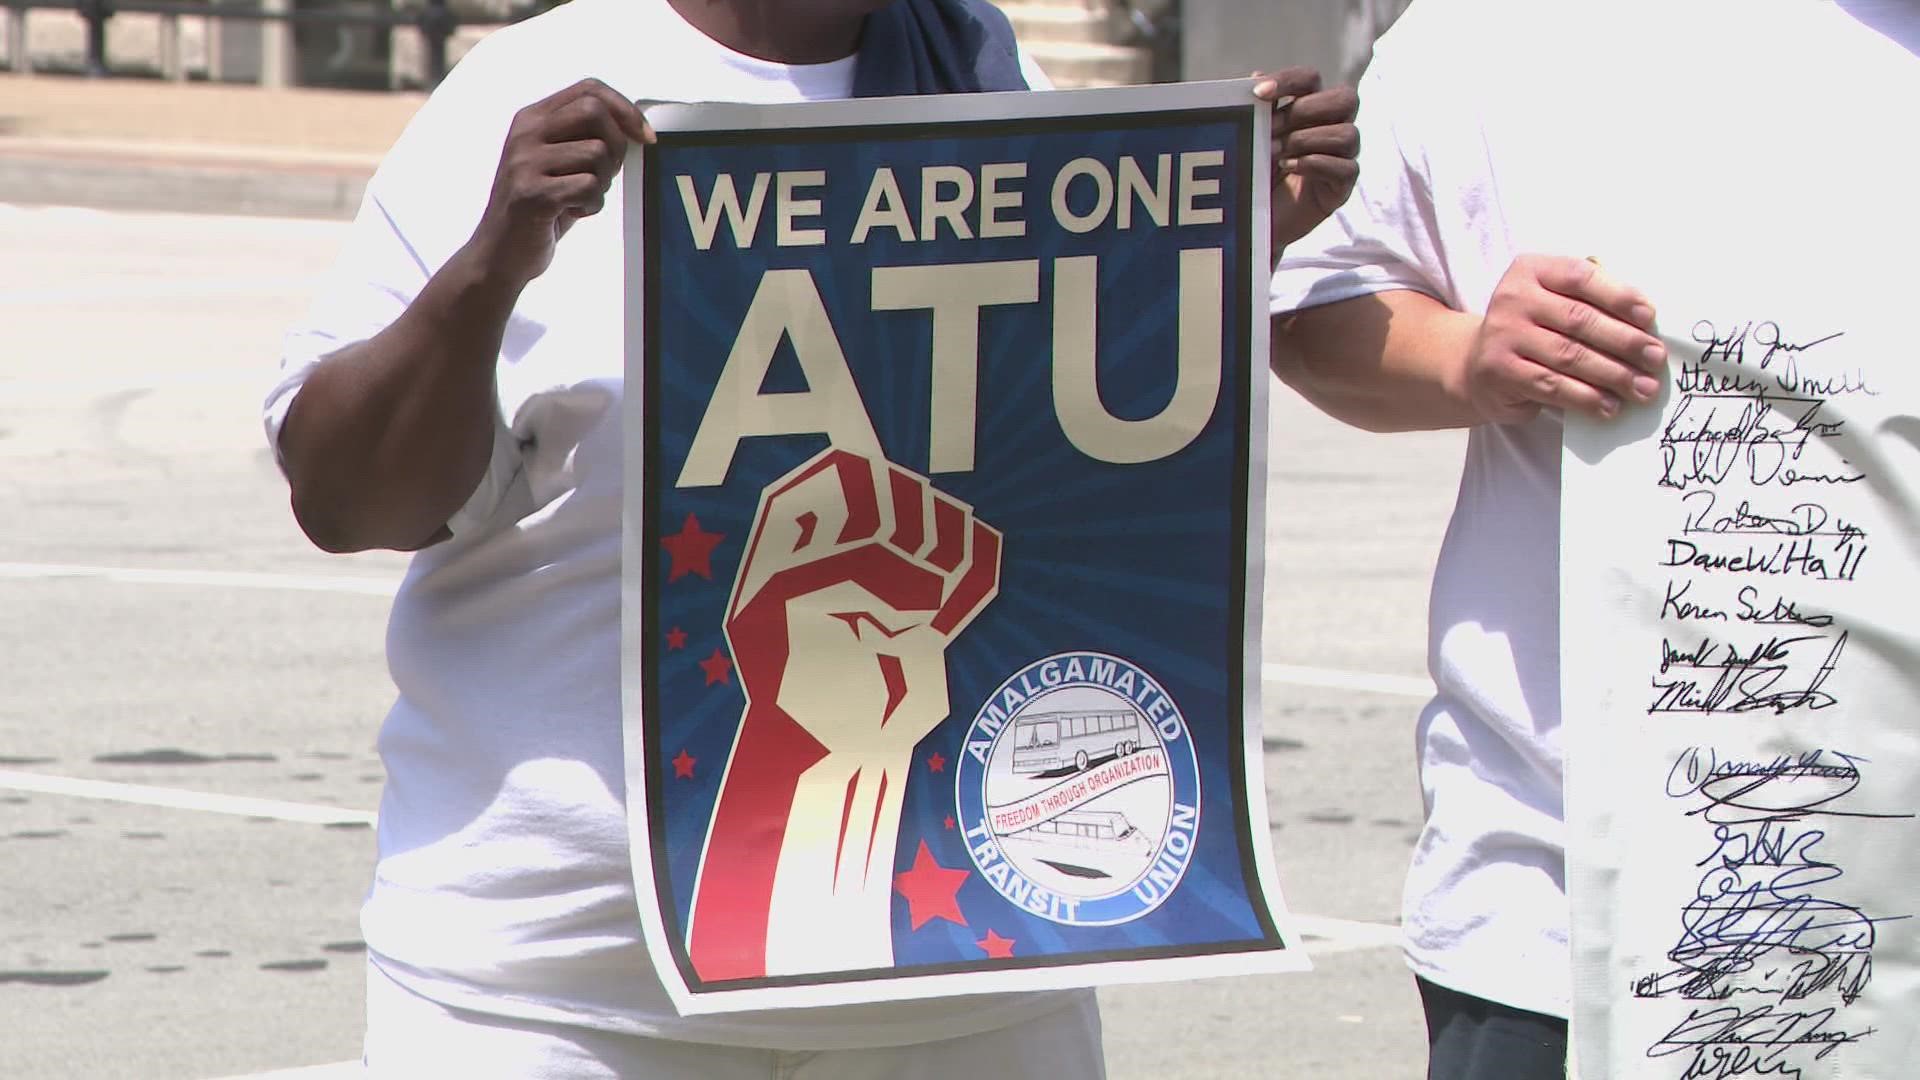 Of those that voted, 97% of union members voted no on TARC's proposal.